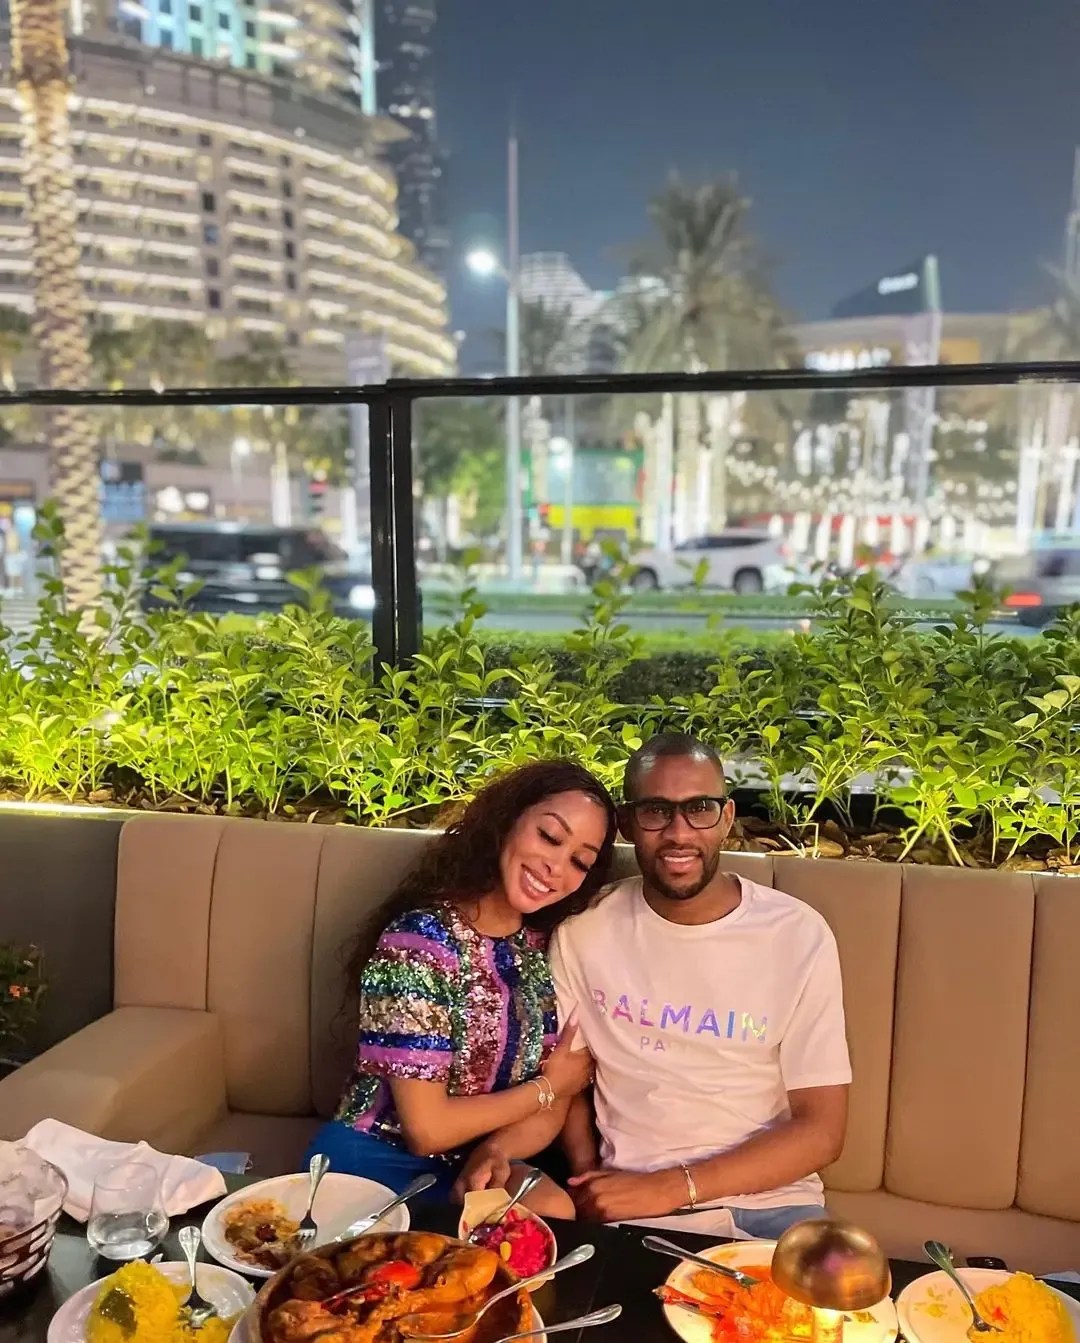 Photos: Khanyi Mbau gets spoiled by lover in Dubai